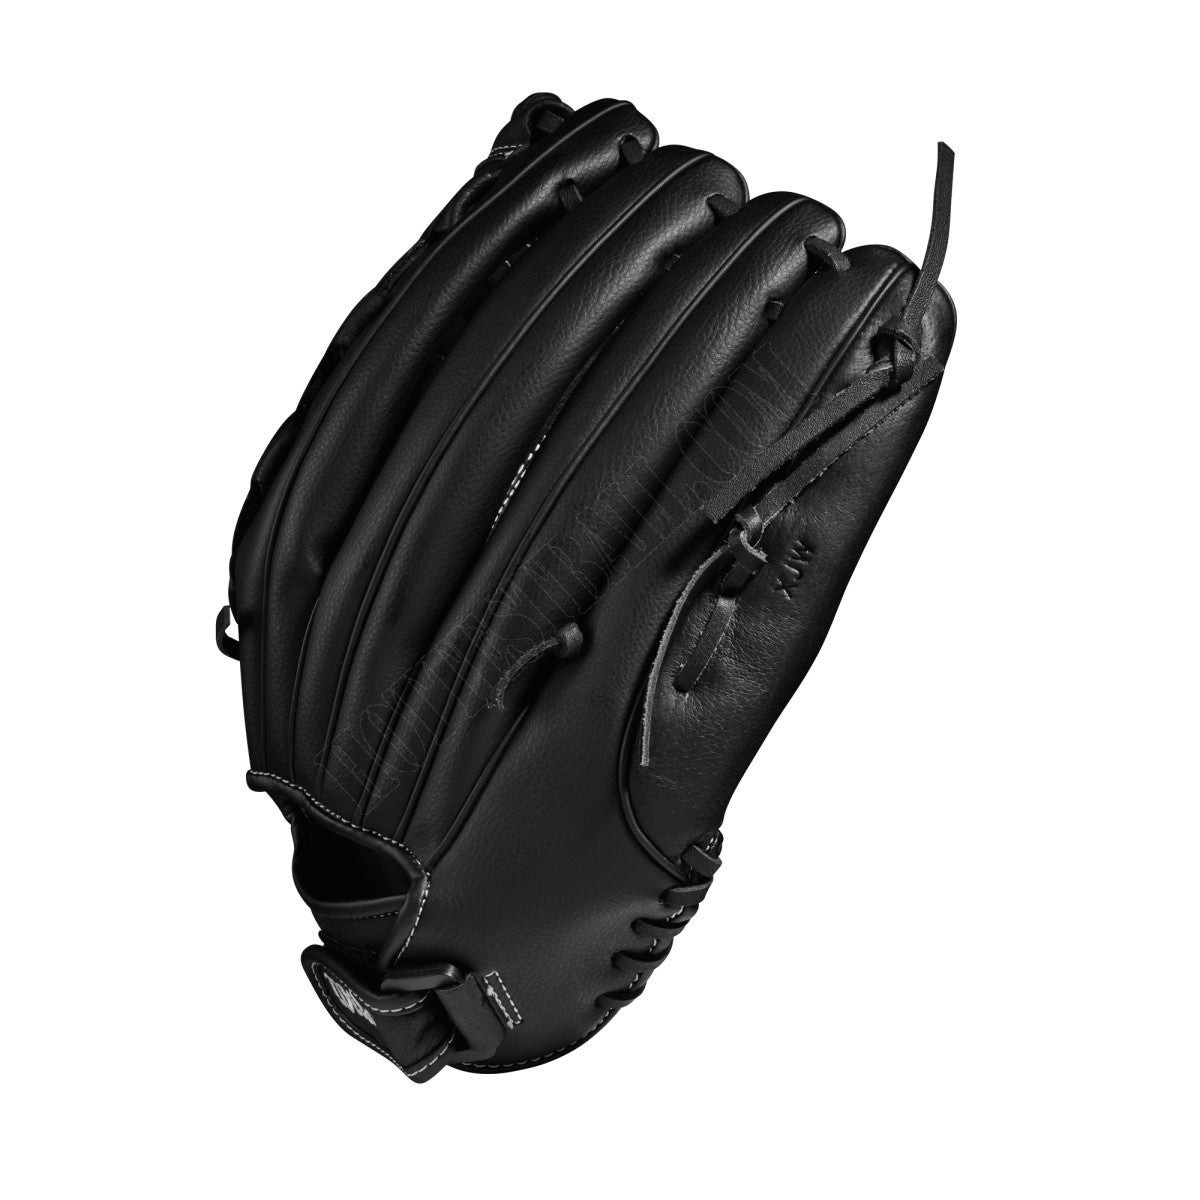 A360 14" Slowpitch Glove - Left Hand Throw ● Wilson Promotions - -4